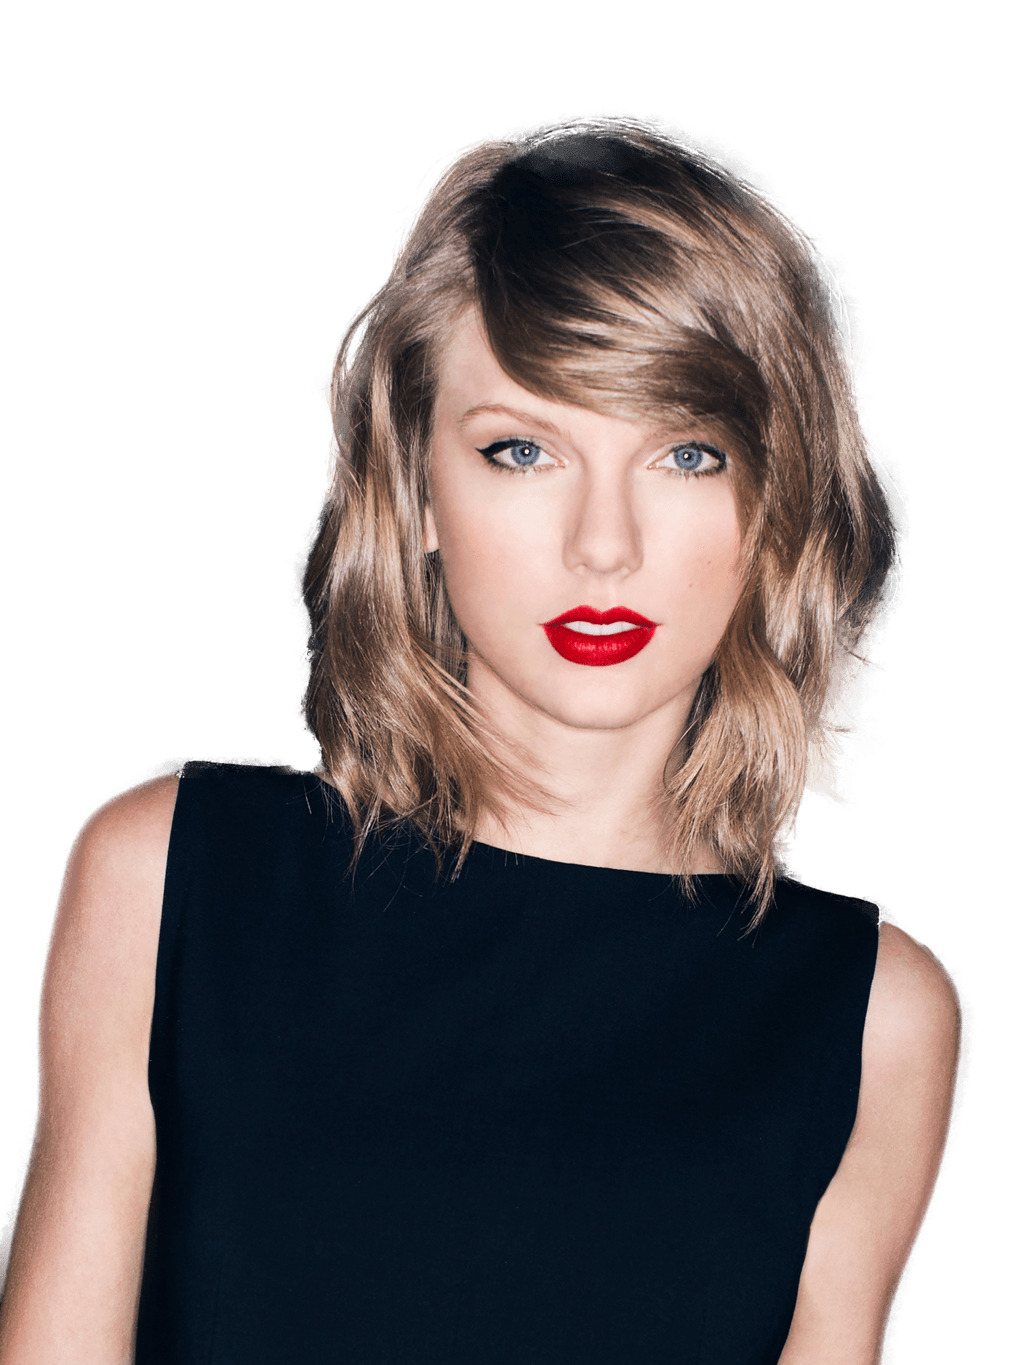 Black Dress Taylor Swift png icons